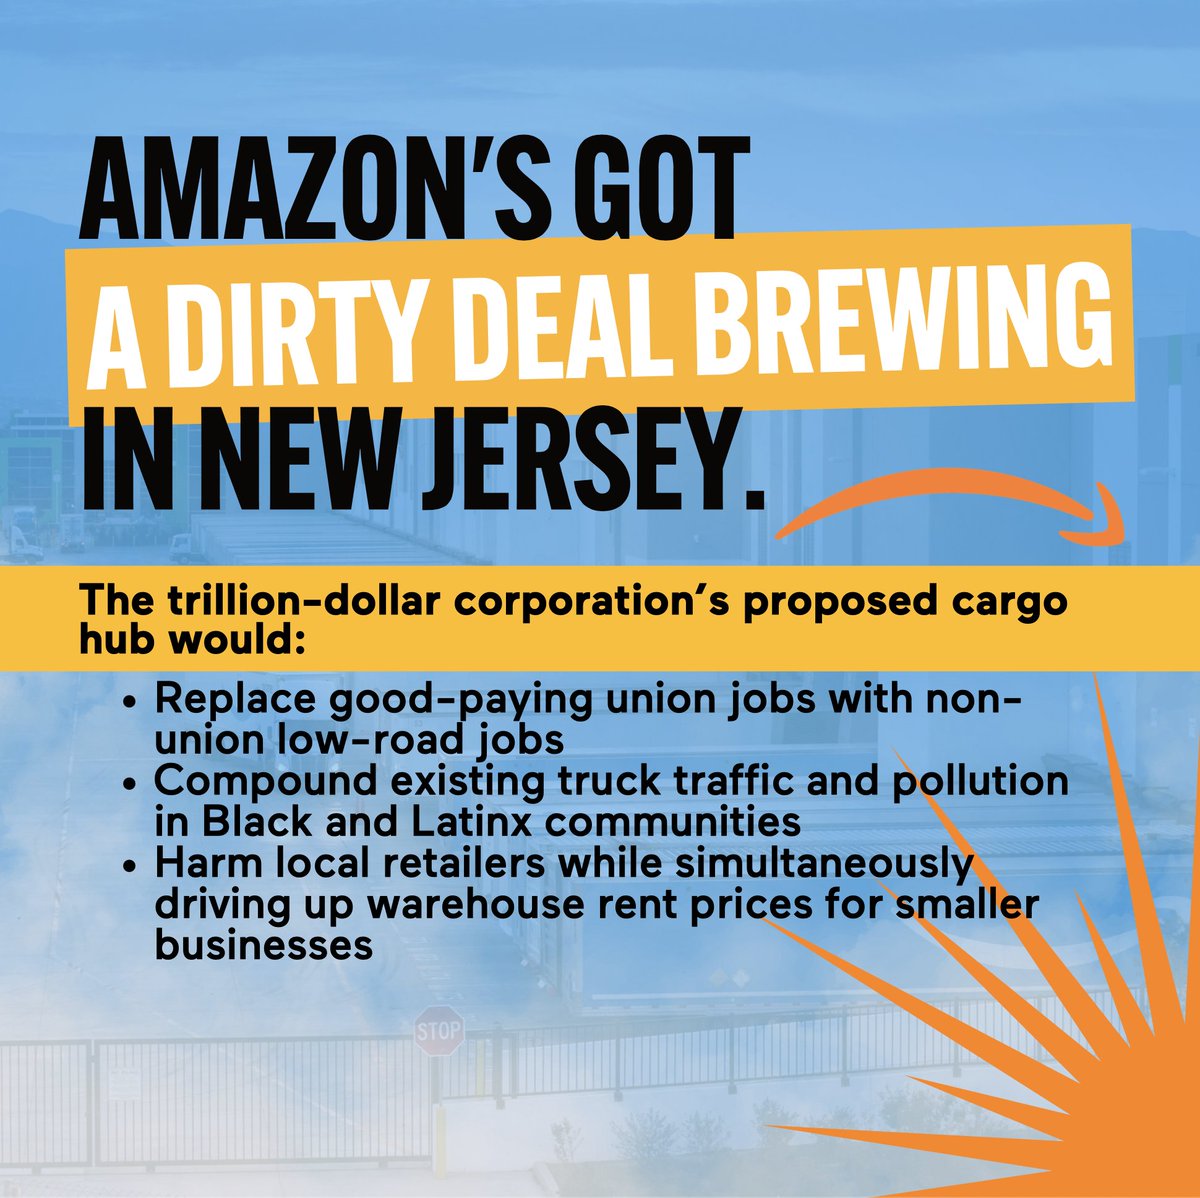 Community Leaders, Amazon Workers, Environmentalists, Labor Groups, Small Business Owners were shut out of talks between @Amazon and @PANYNJ, deciding the fate of a massive Amazon air cargo mega hub in Newark. In secret. #NoSecretHub